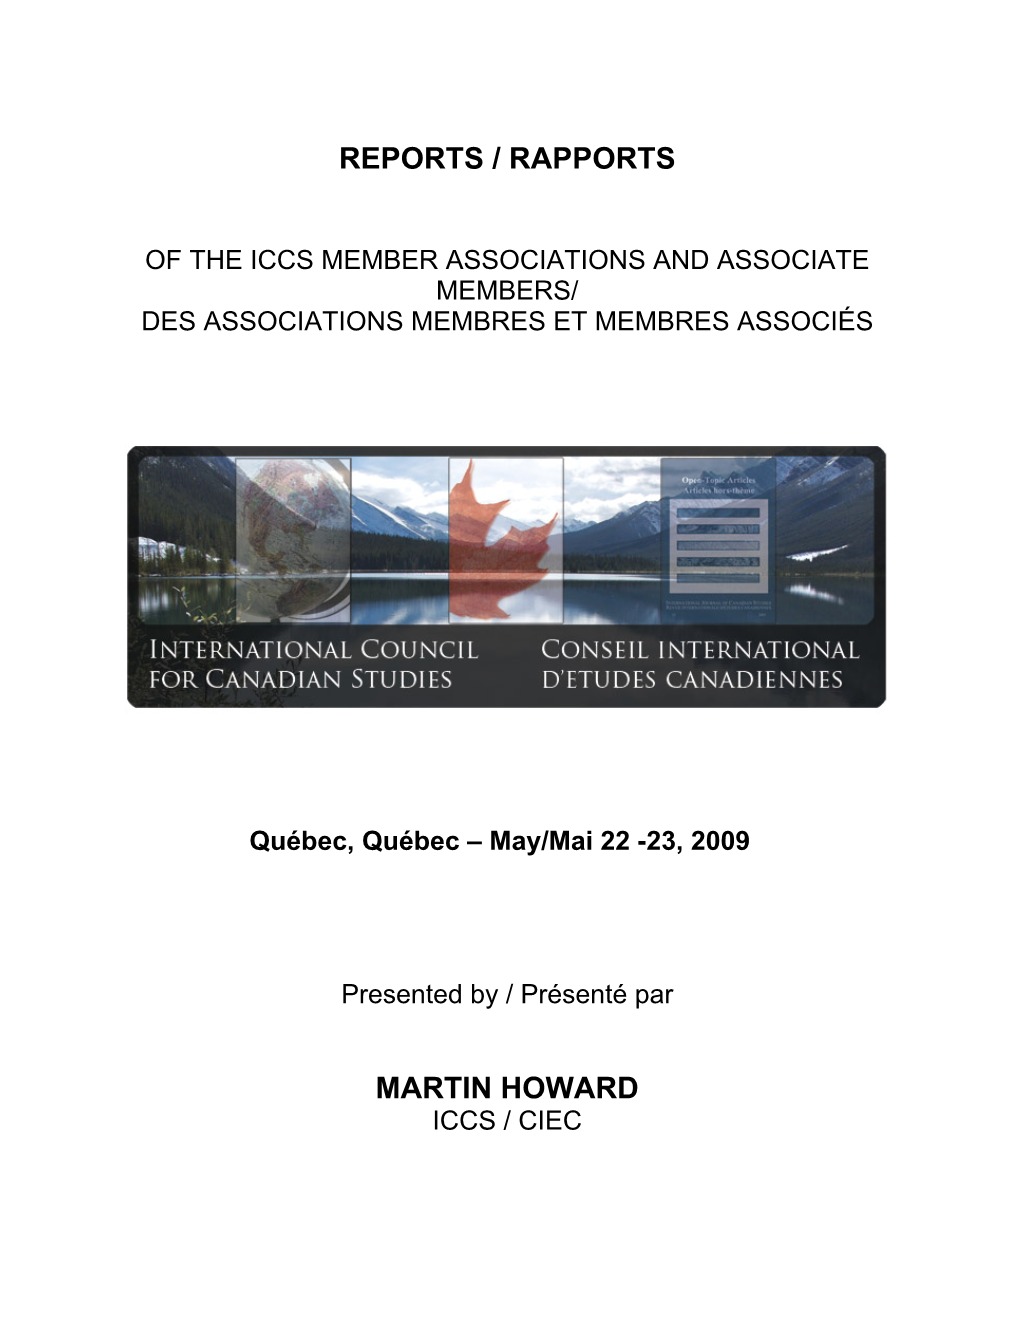 Reports / Rapports Martin Howard